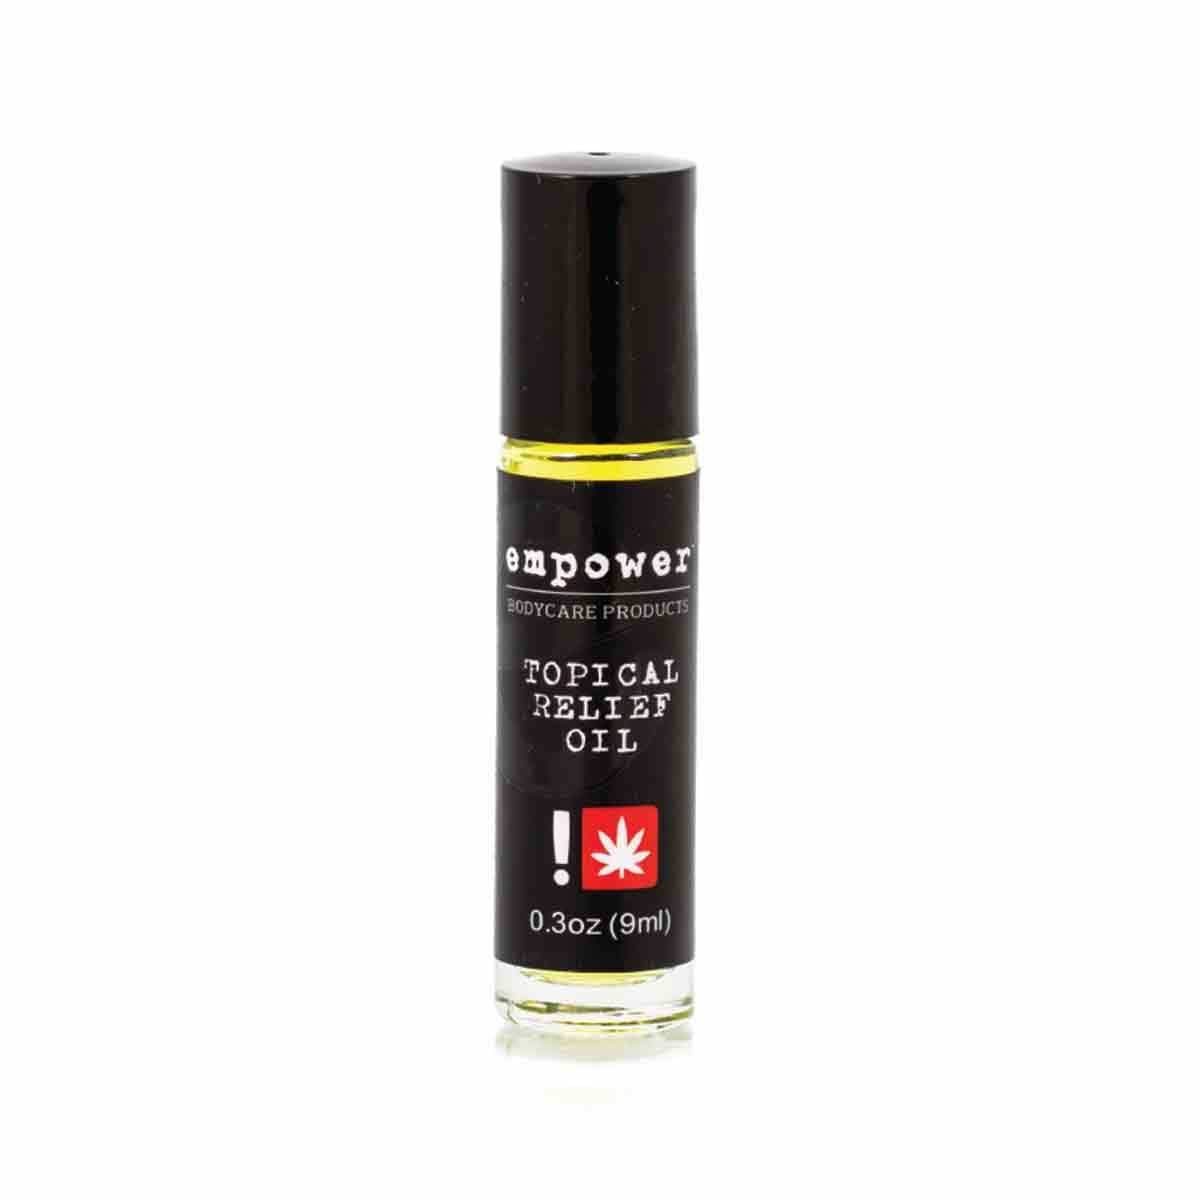 Empower® Topical Relief Oil - Black Label 9ml